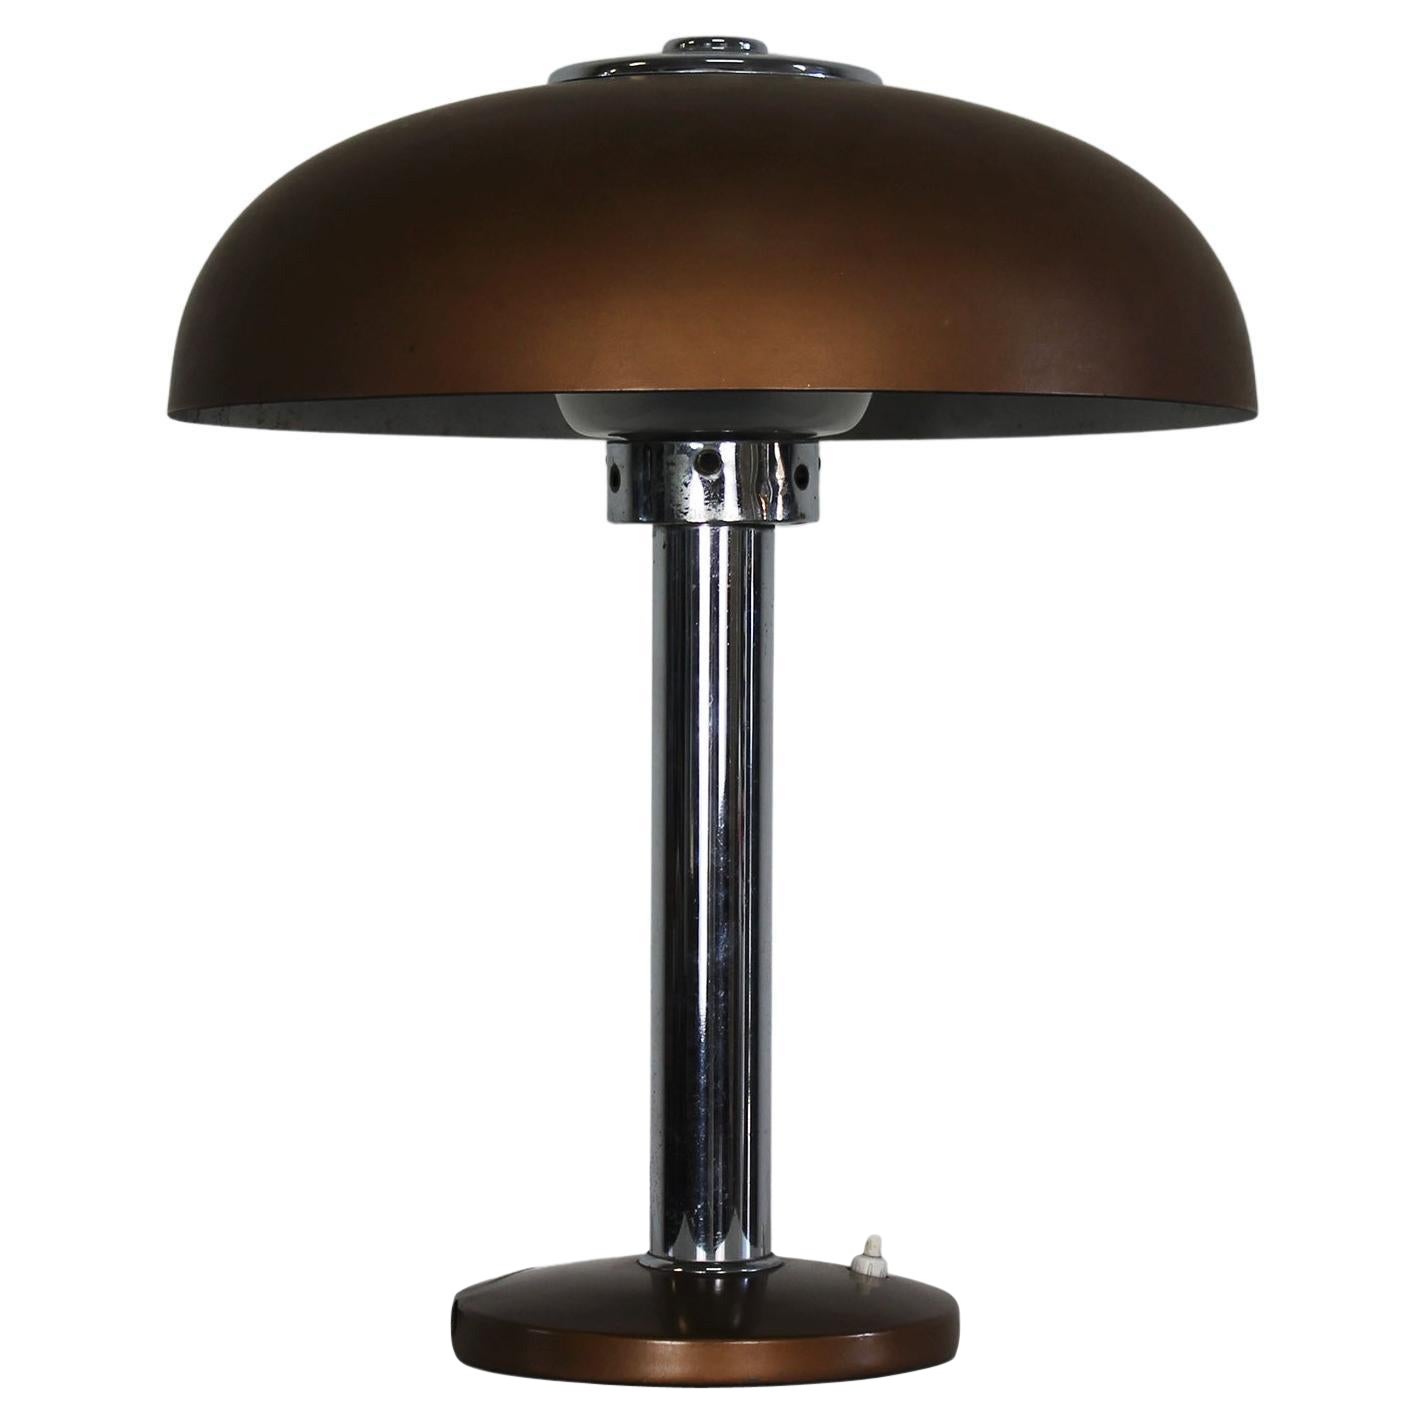 Gio Ponti 546 Table Lamp in Aluminum and Opaline Glass by Ugo Pollice 1940s For Sale